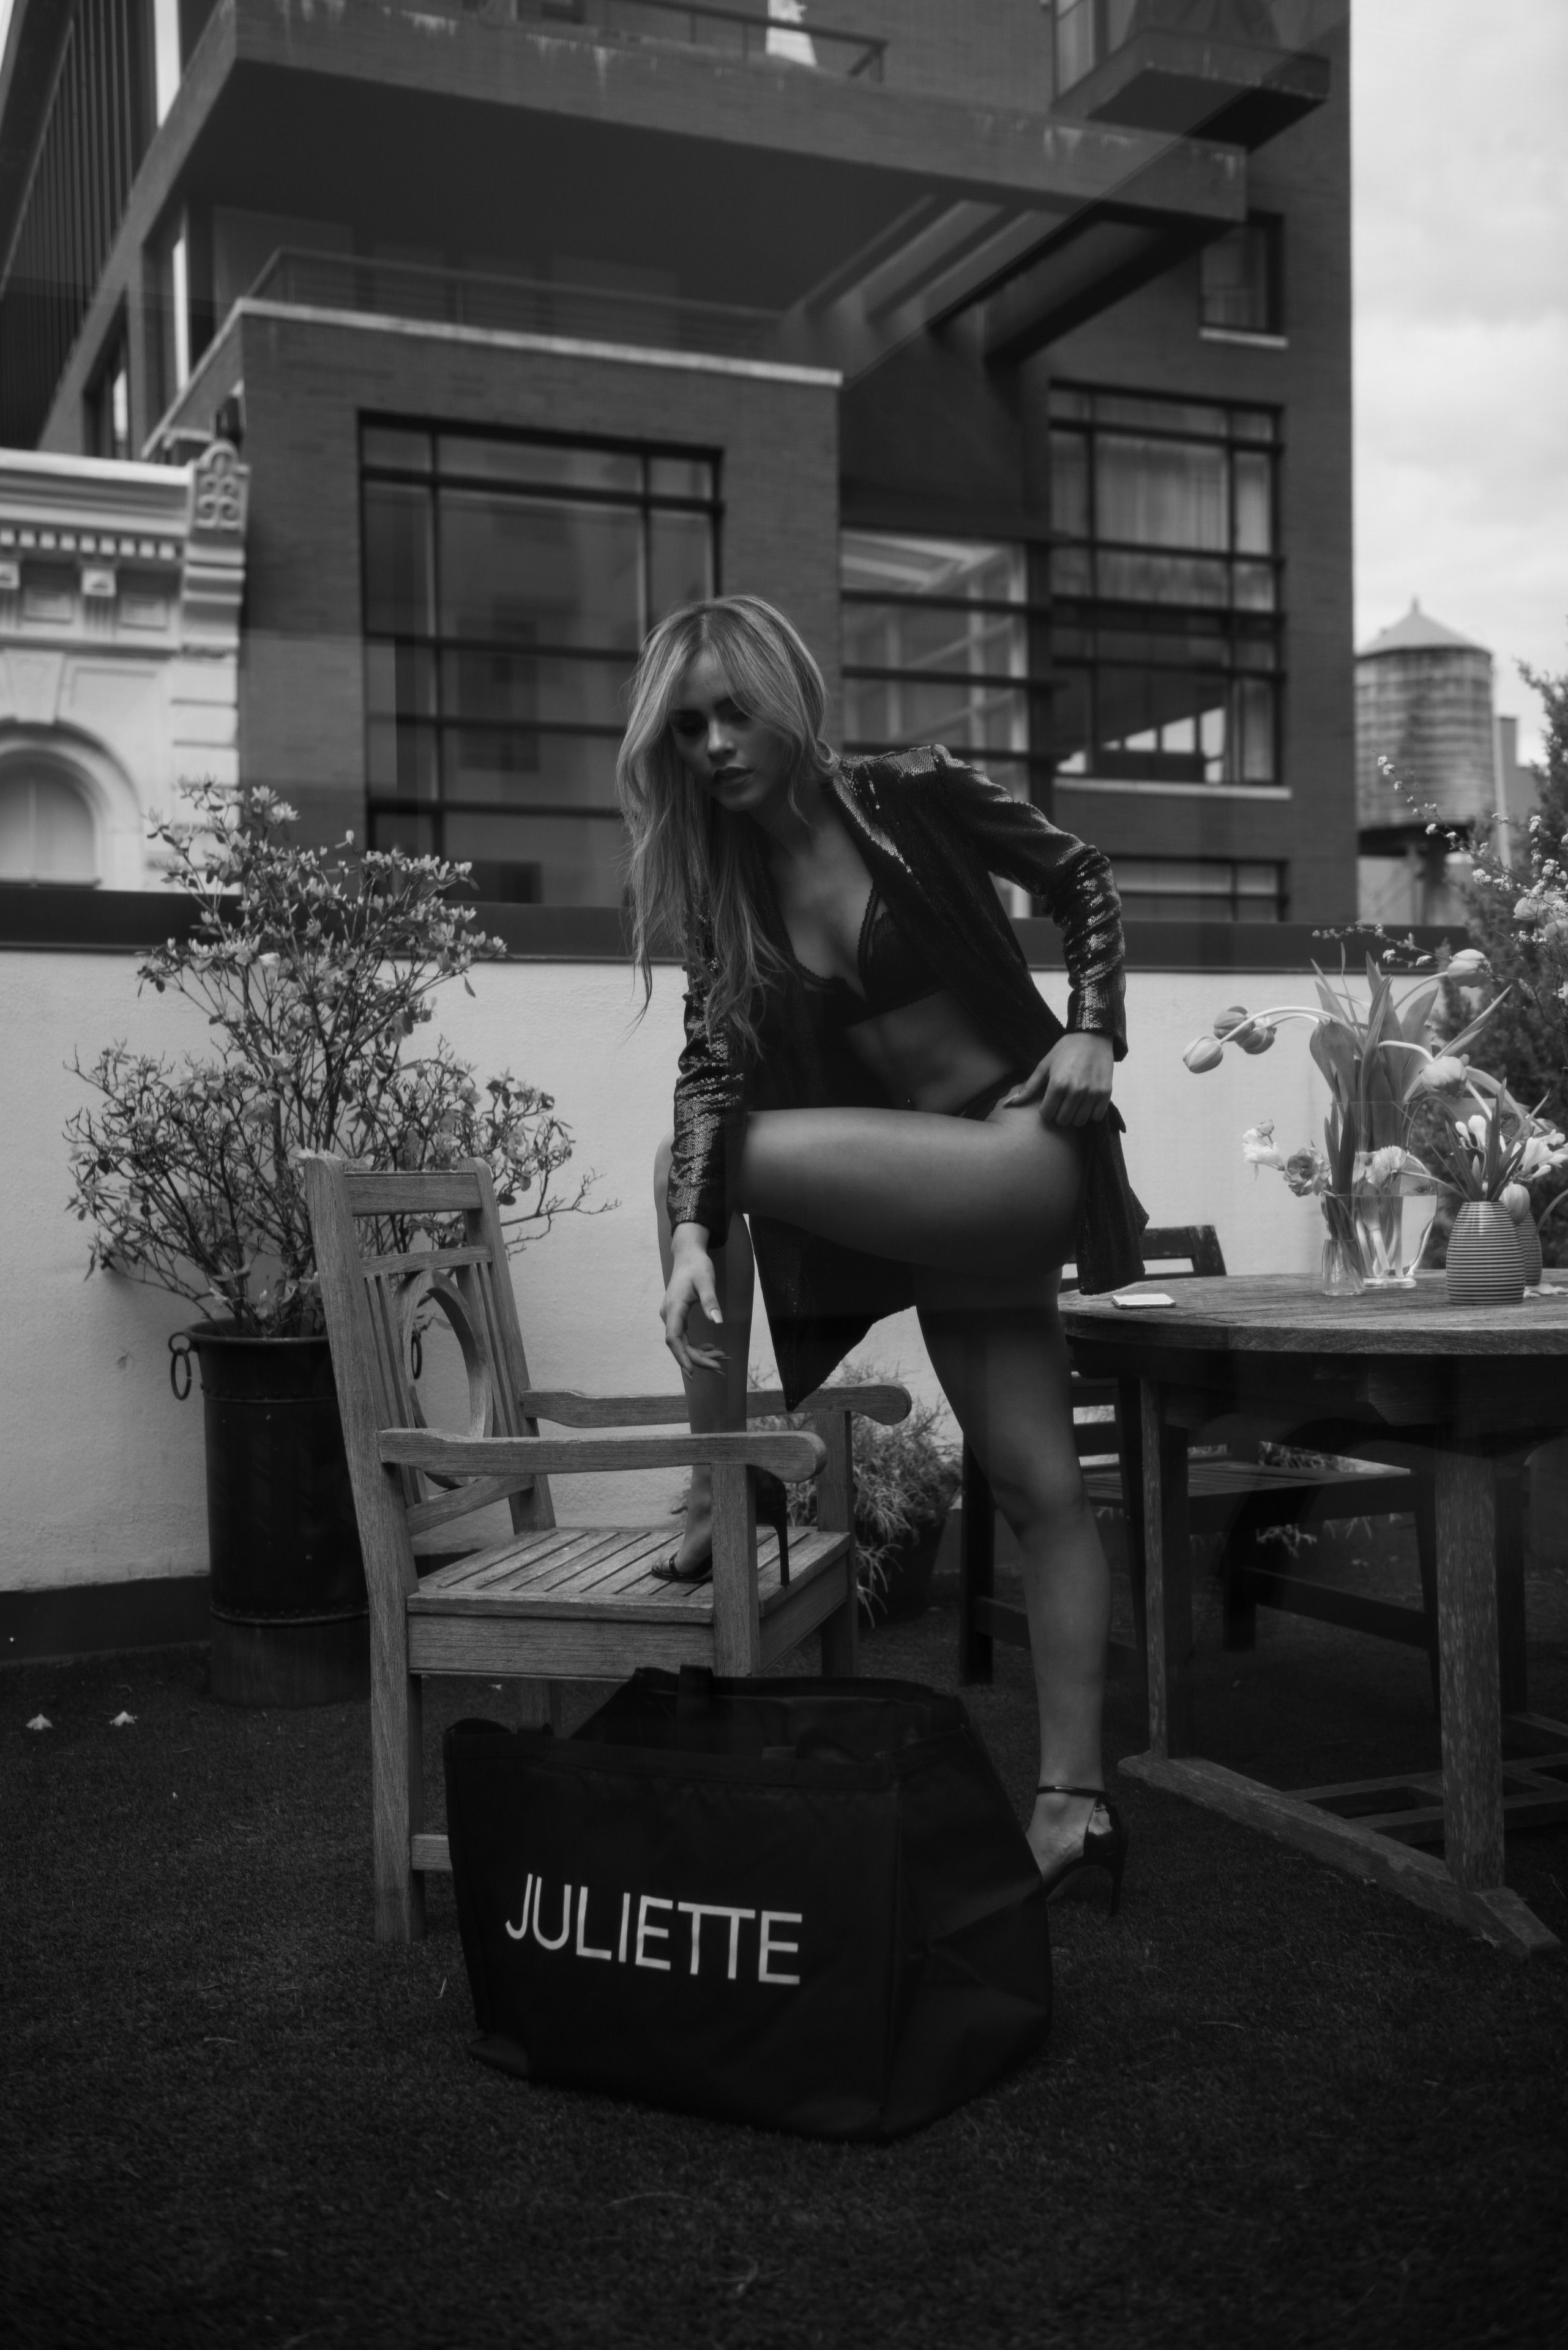 juliettecleaners Background